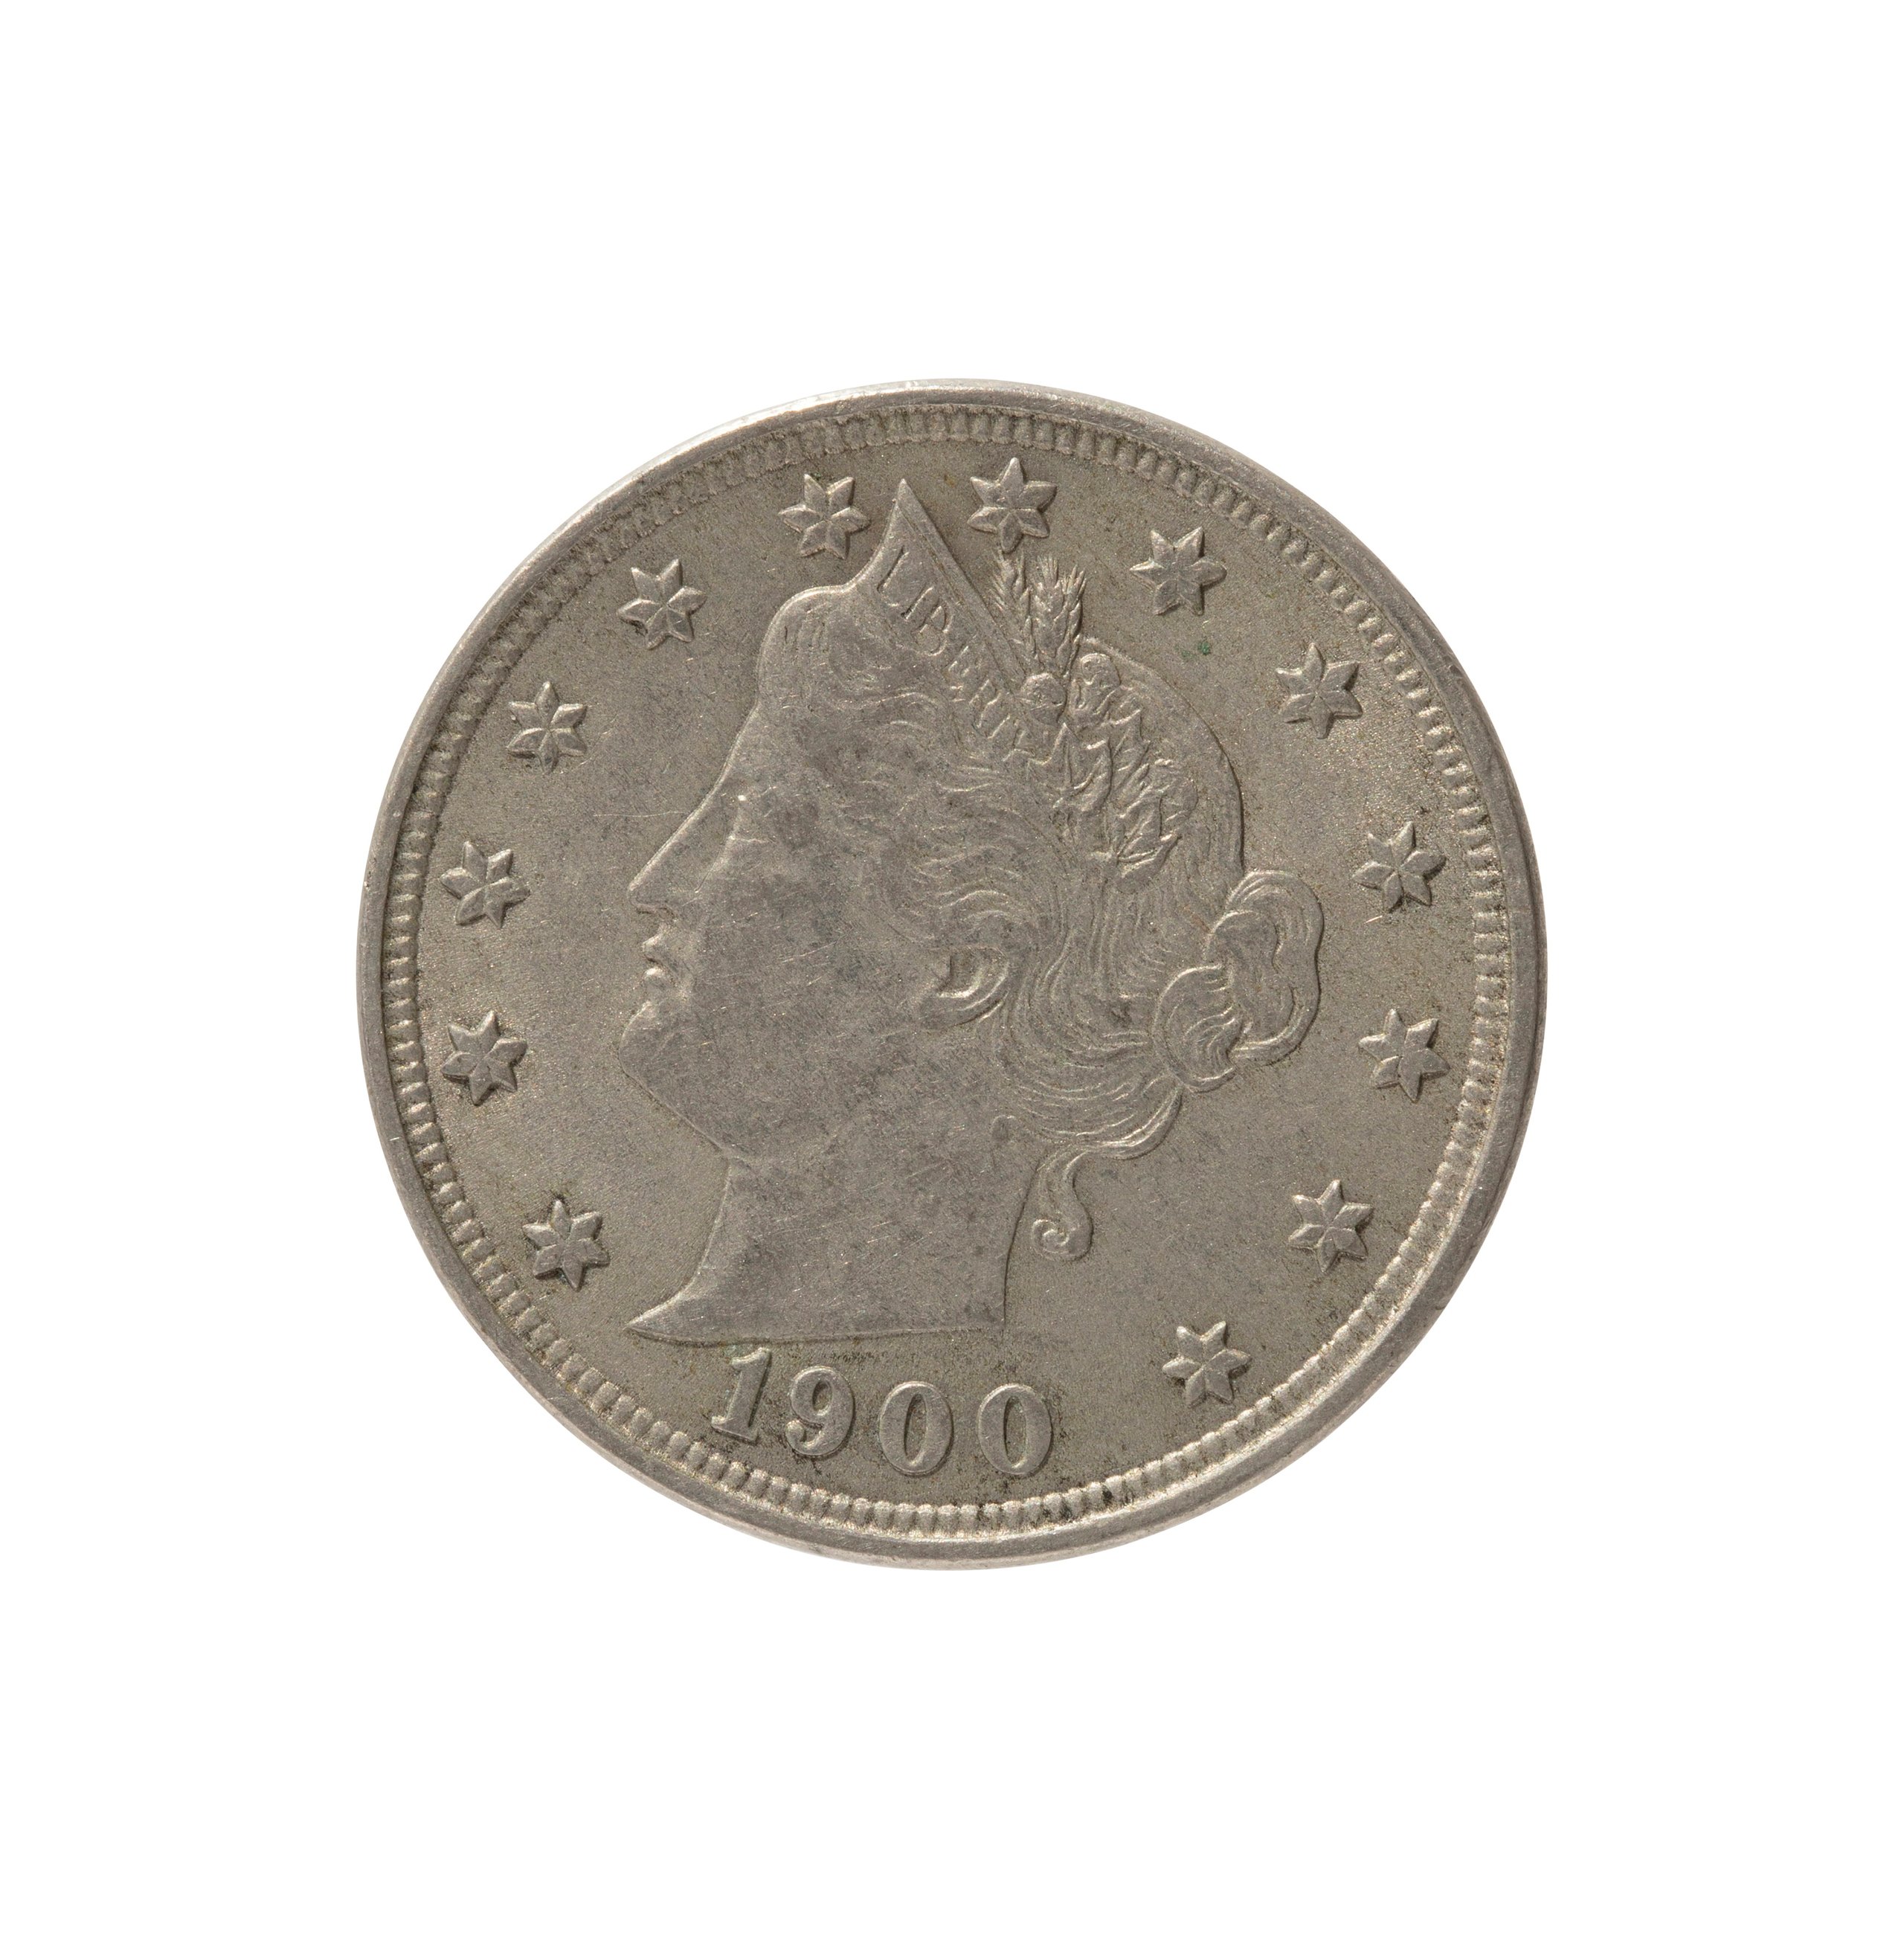 American Five Cents coin